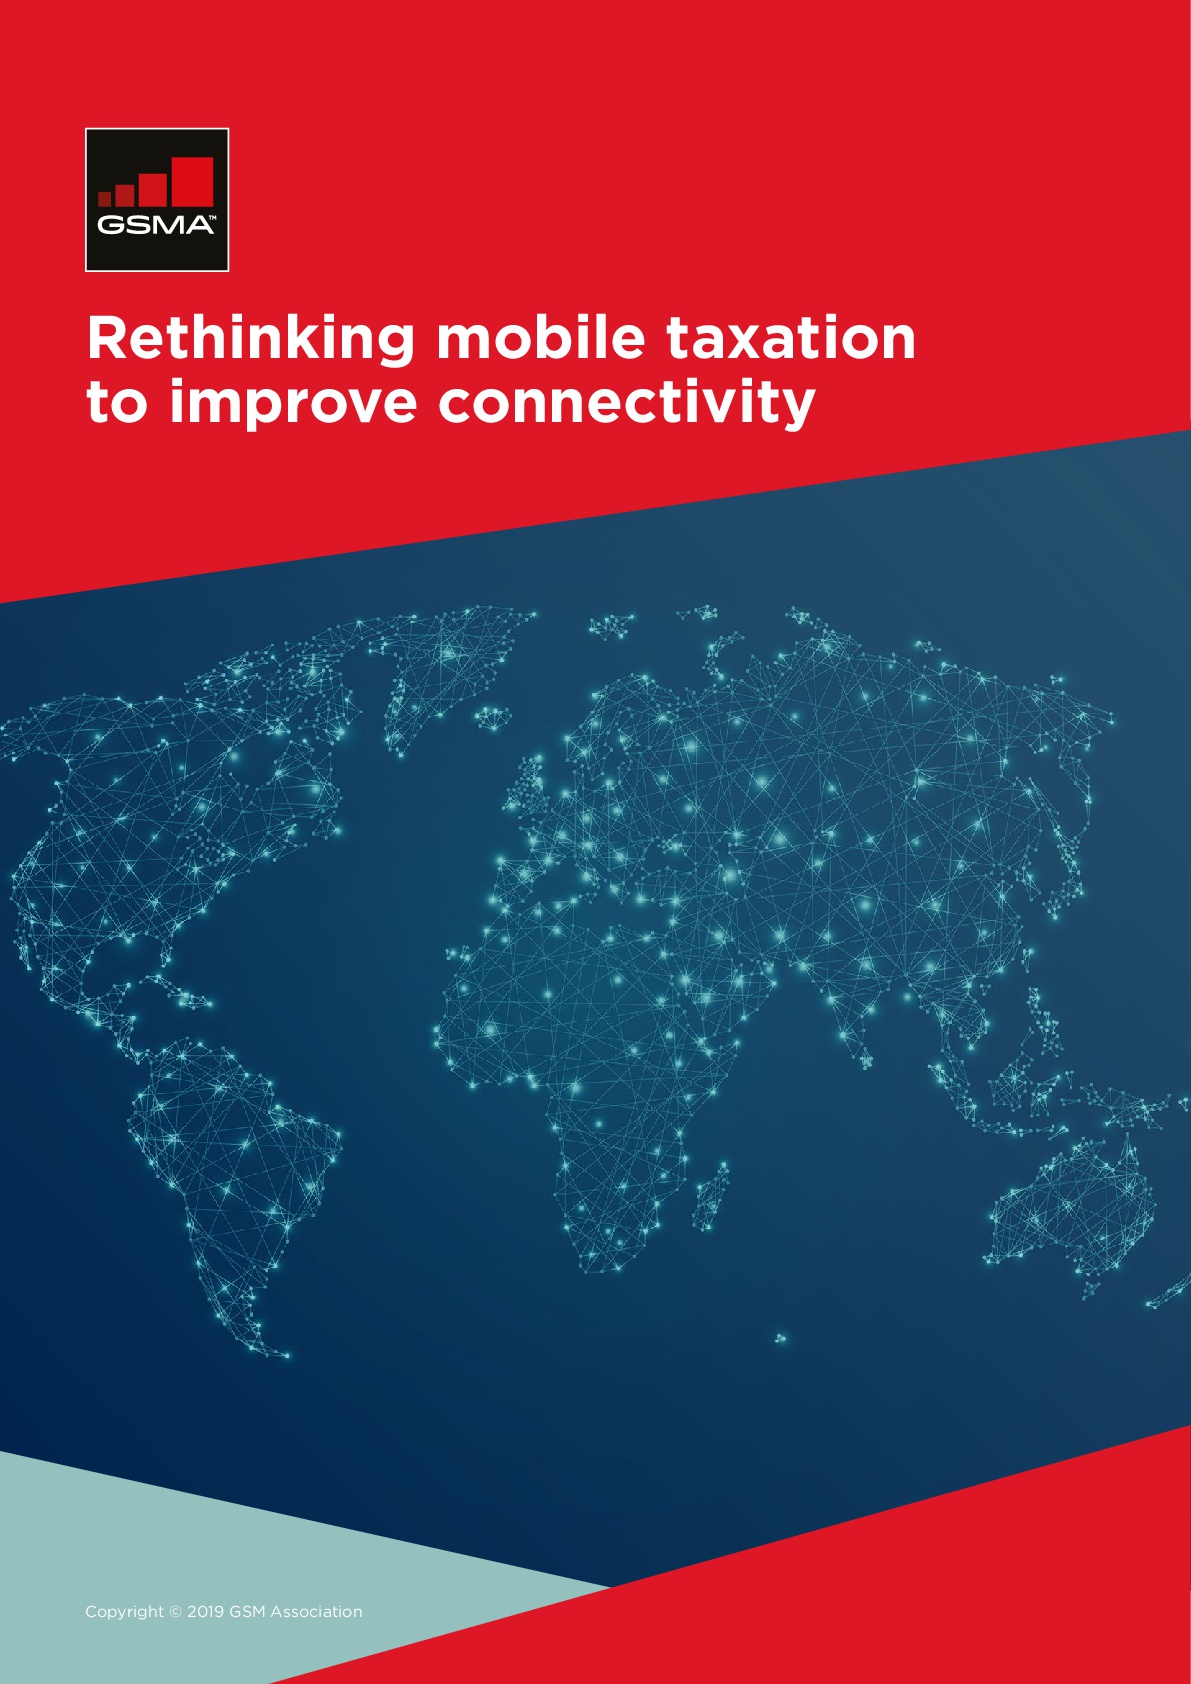 Rethinking mobile taxation to improve connectivity 2019 image